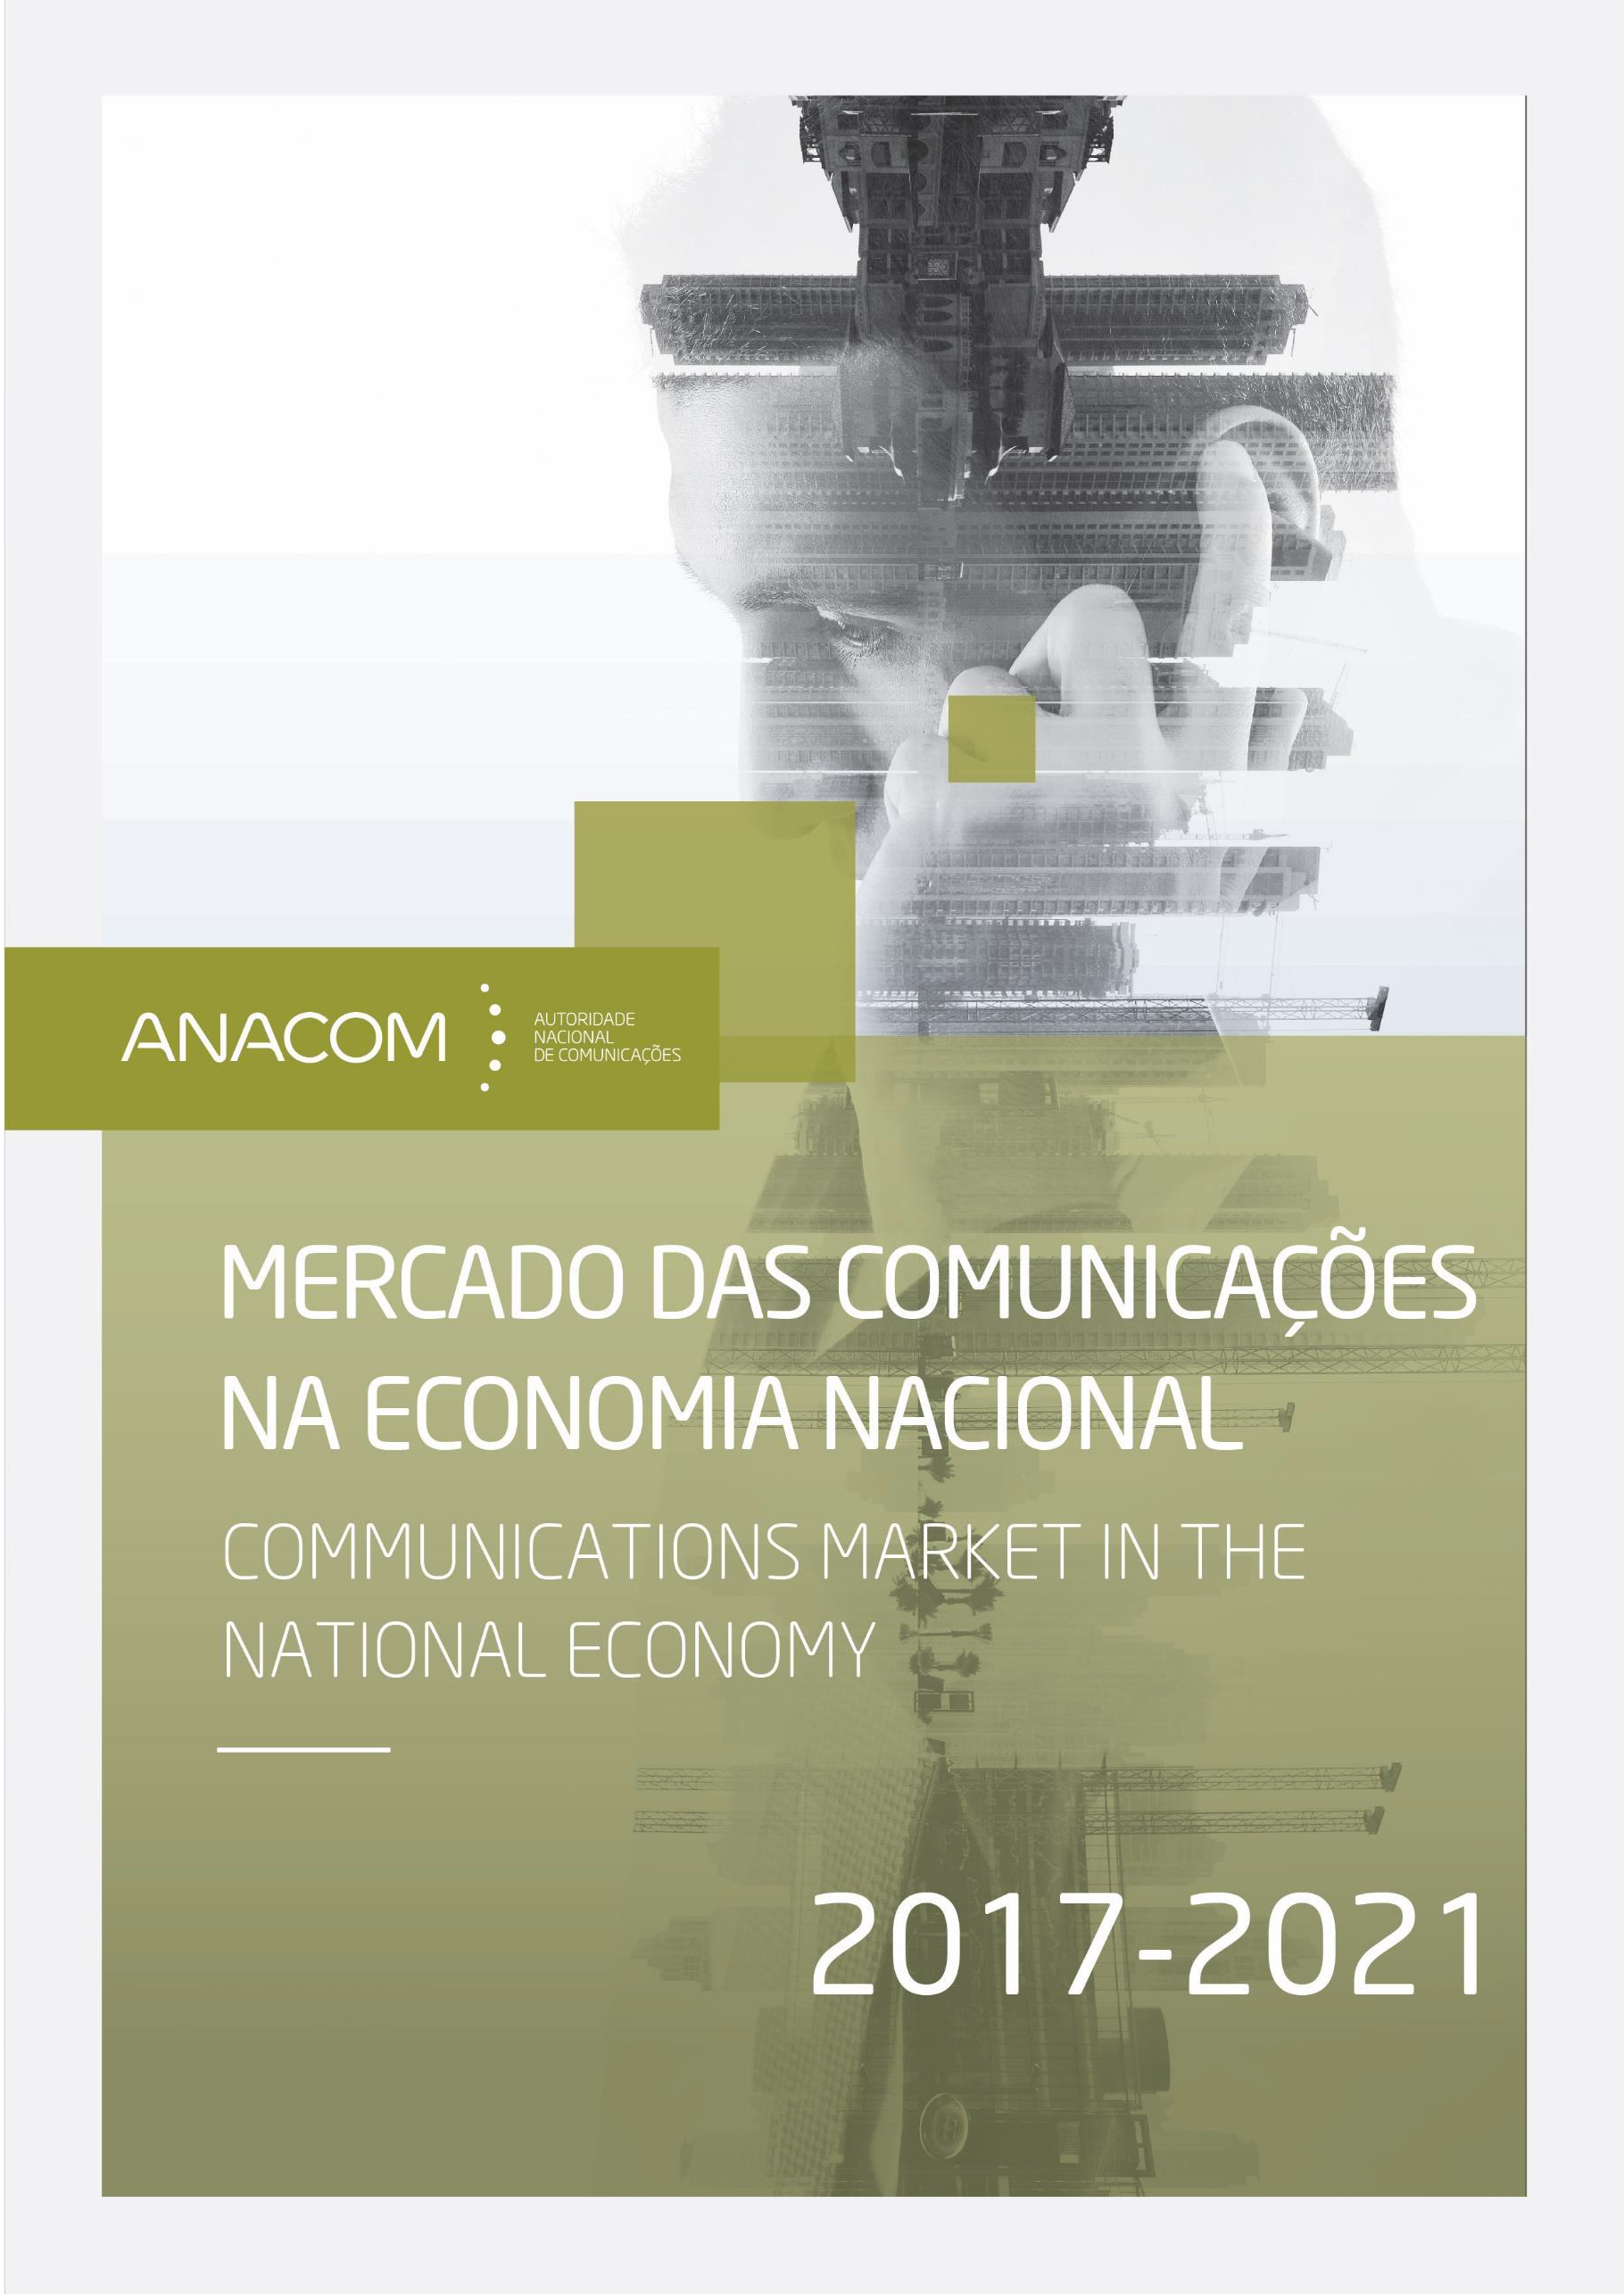 Communications Market in the National Economy (2017-2021)